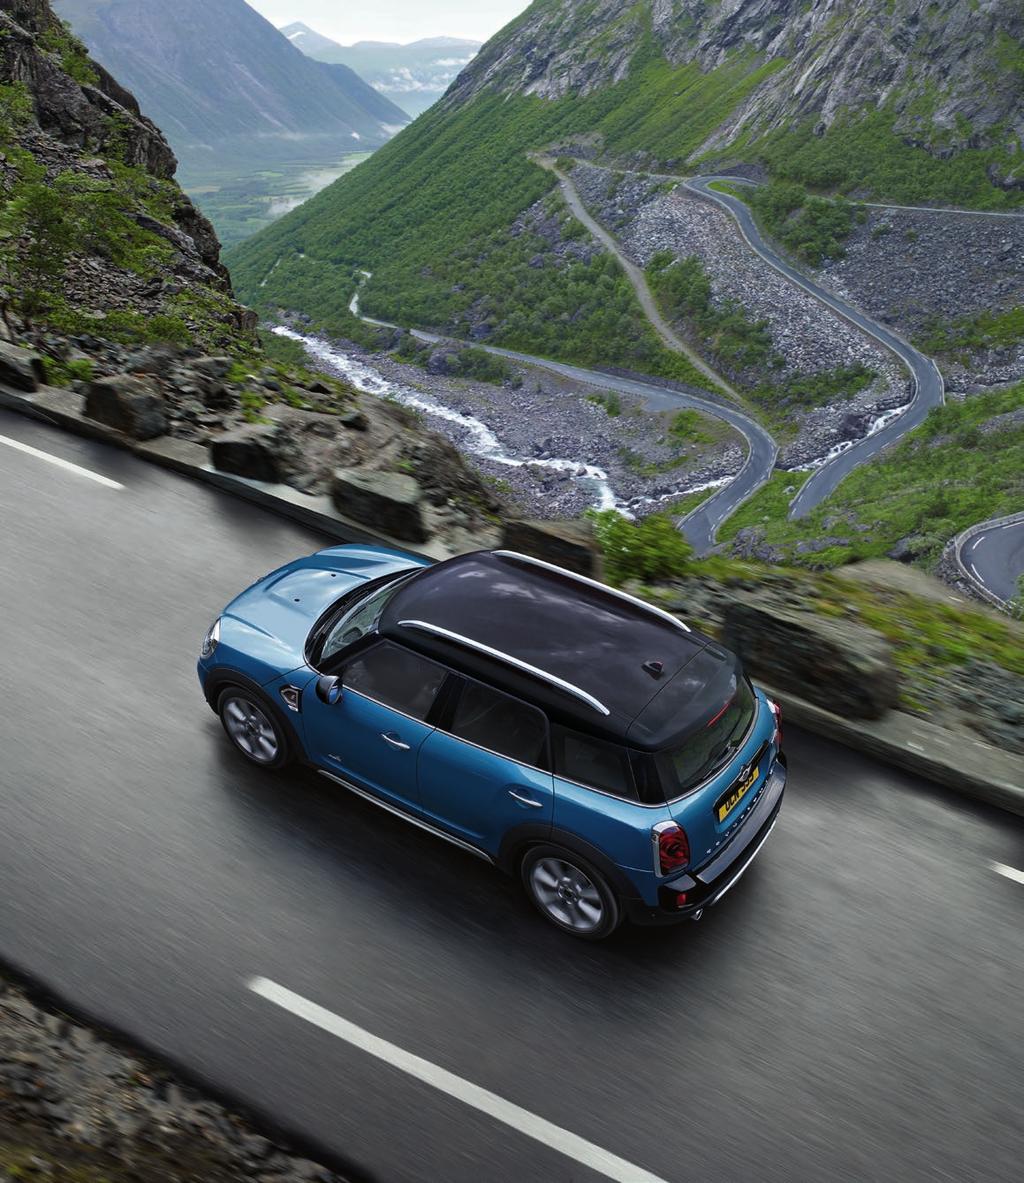 THE MINI COUNTRYMAN. TAKE A DIFFERENT PATH. The adventurer of our line-up, offering increased practicality and efficiency.